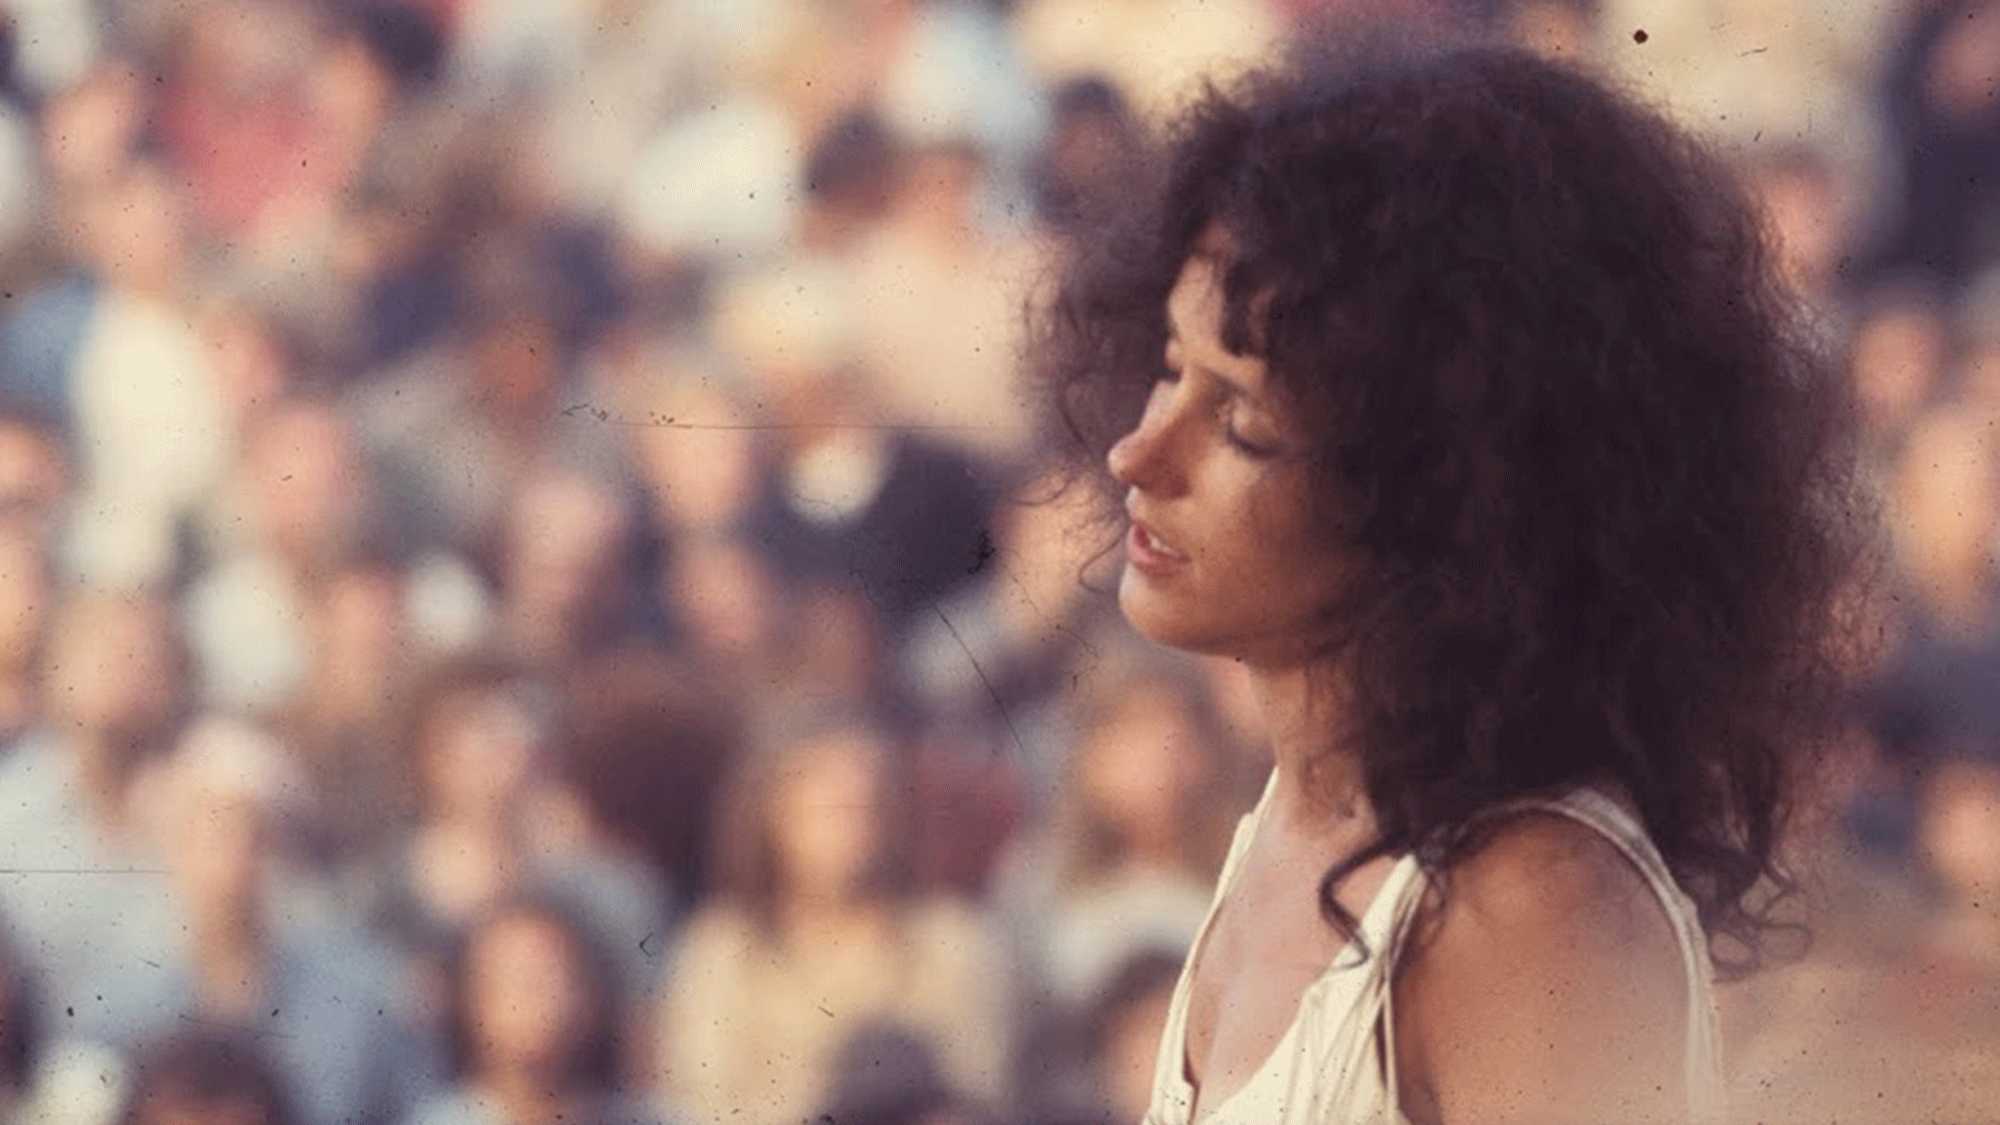 Woodstock: Three Days of Peace and Music (Director’s Cut) (image 3)